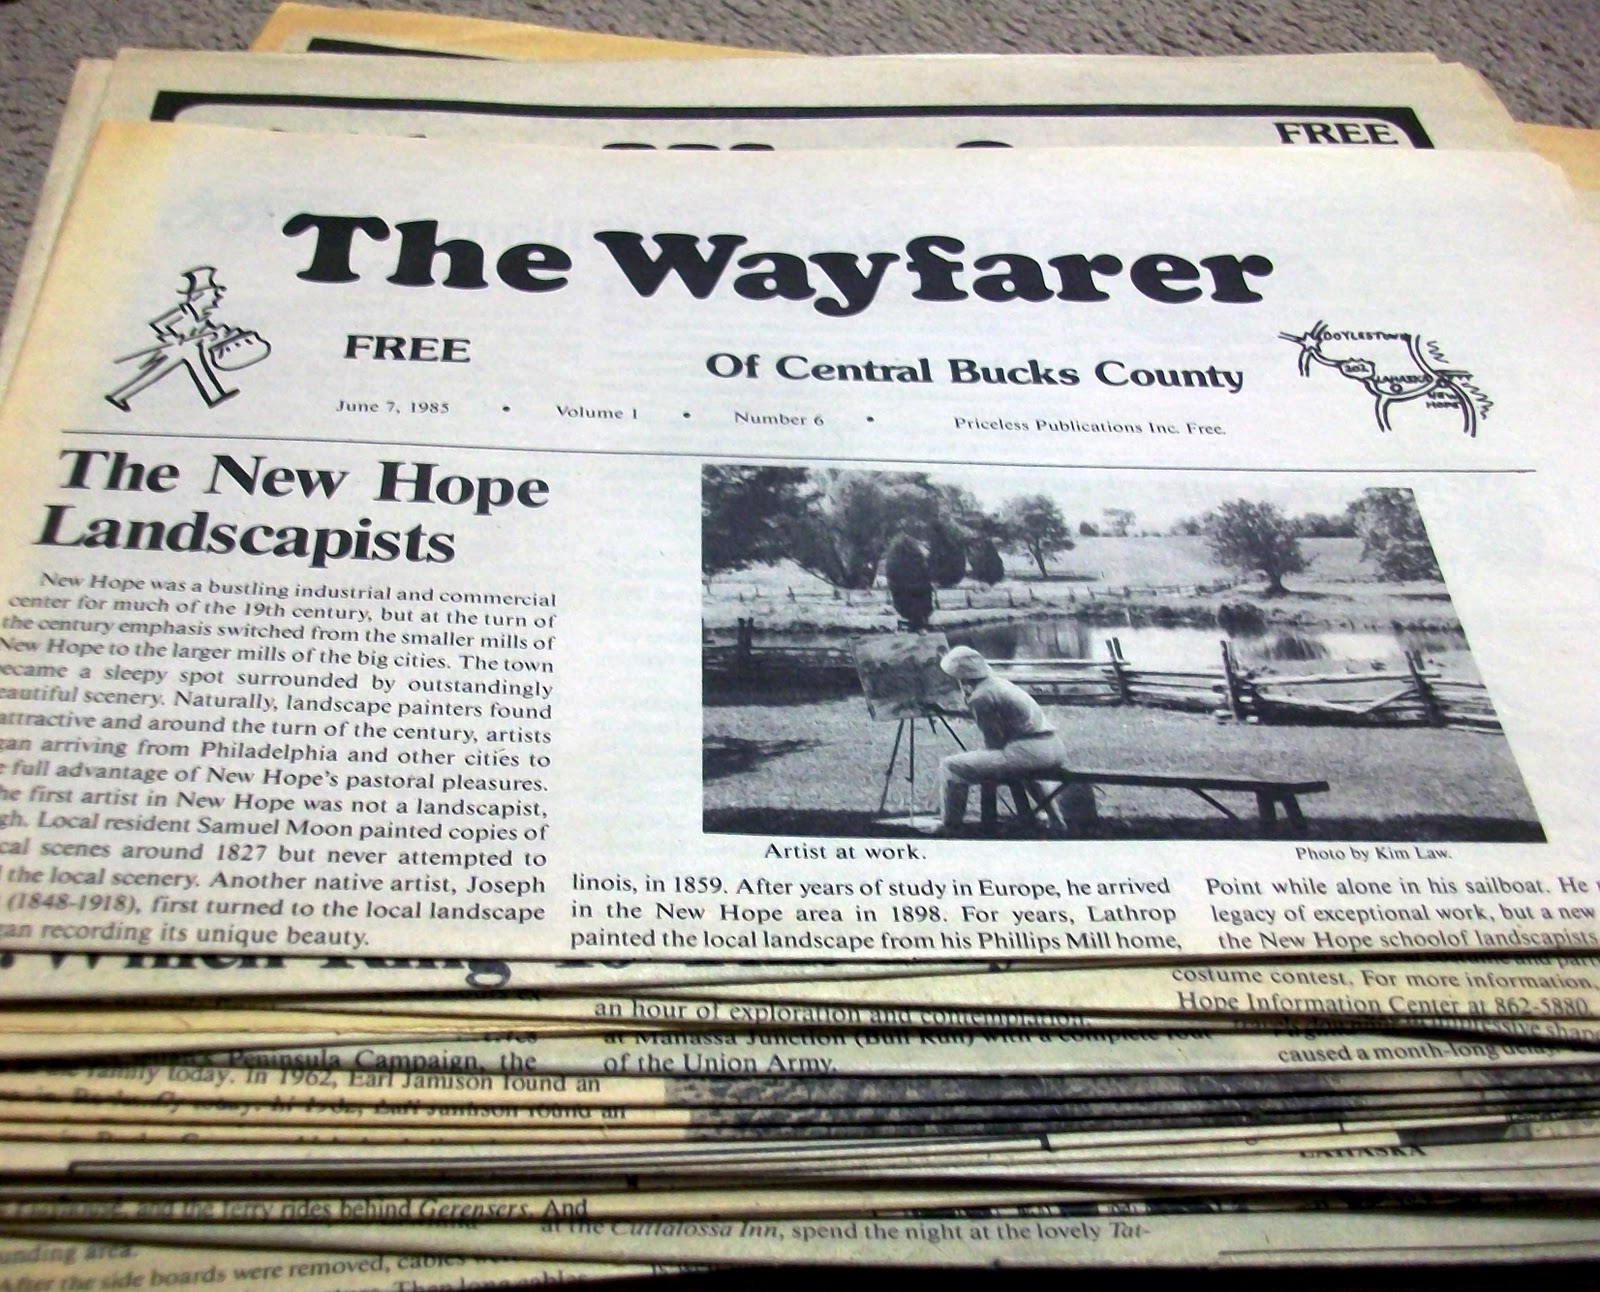 Newspapers and magazines. Newspapers and Magazines 1925 years American. Gary Cooper newspapers and Magazines. Throw away newspapers, Magazines, and Cardboard..